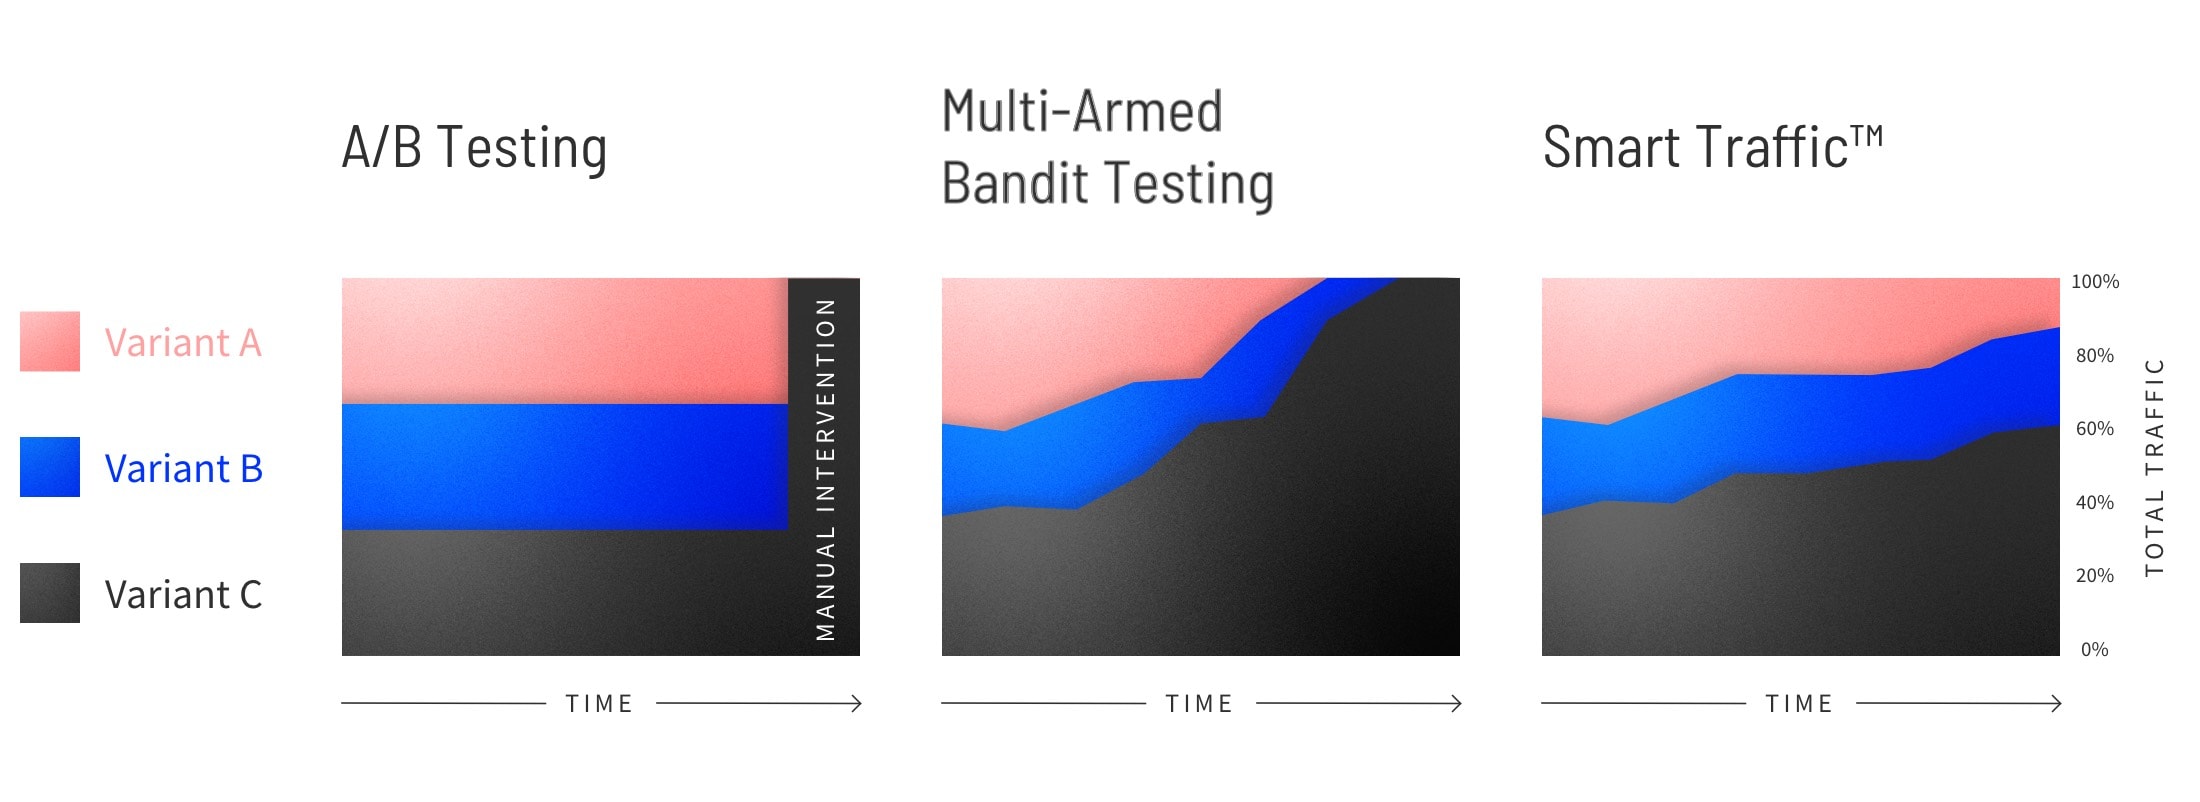 How traffic gets allocated in A/B testing vs Smart Traffic